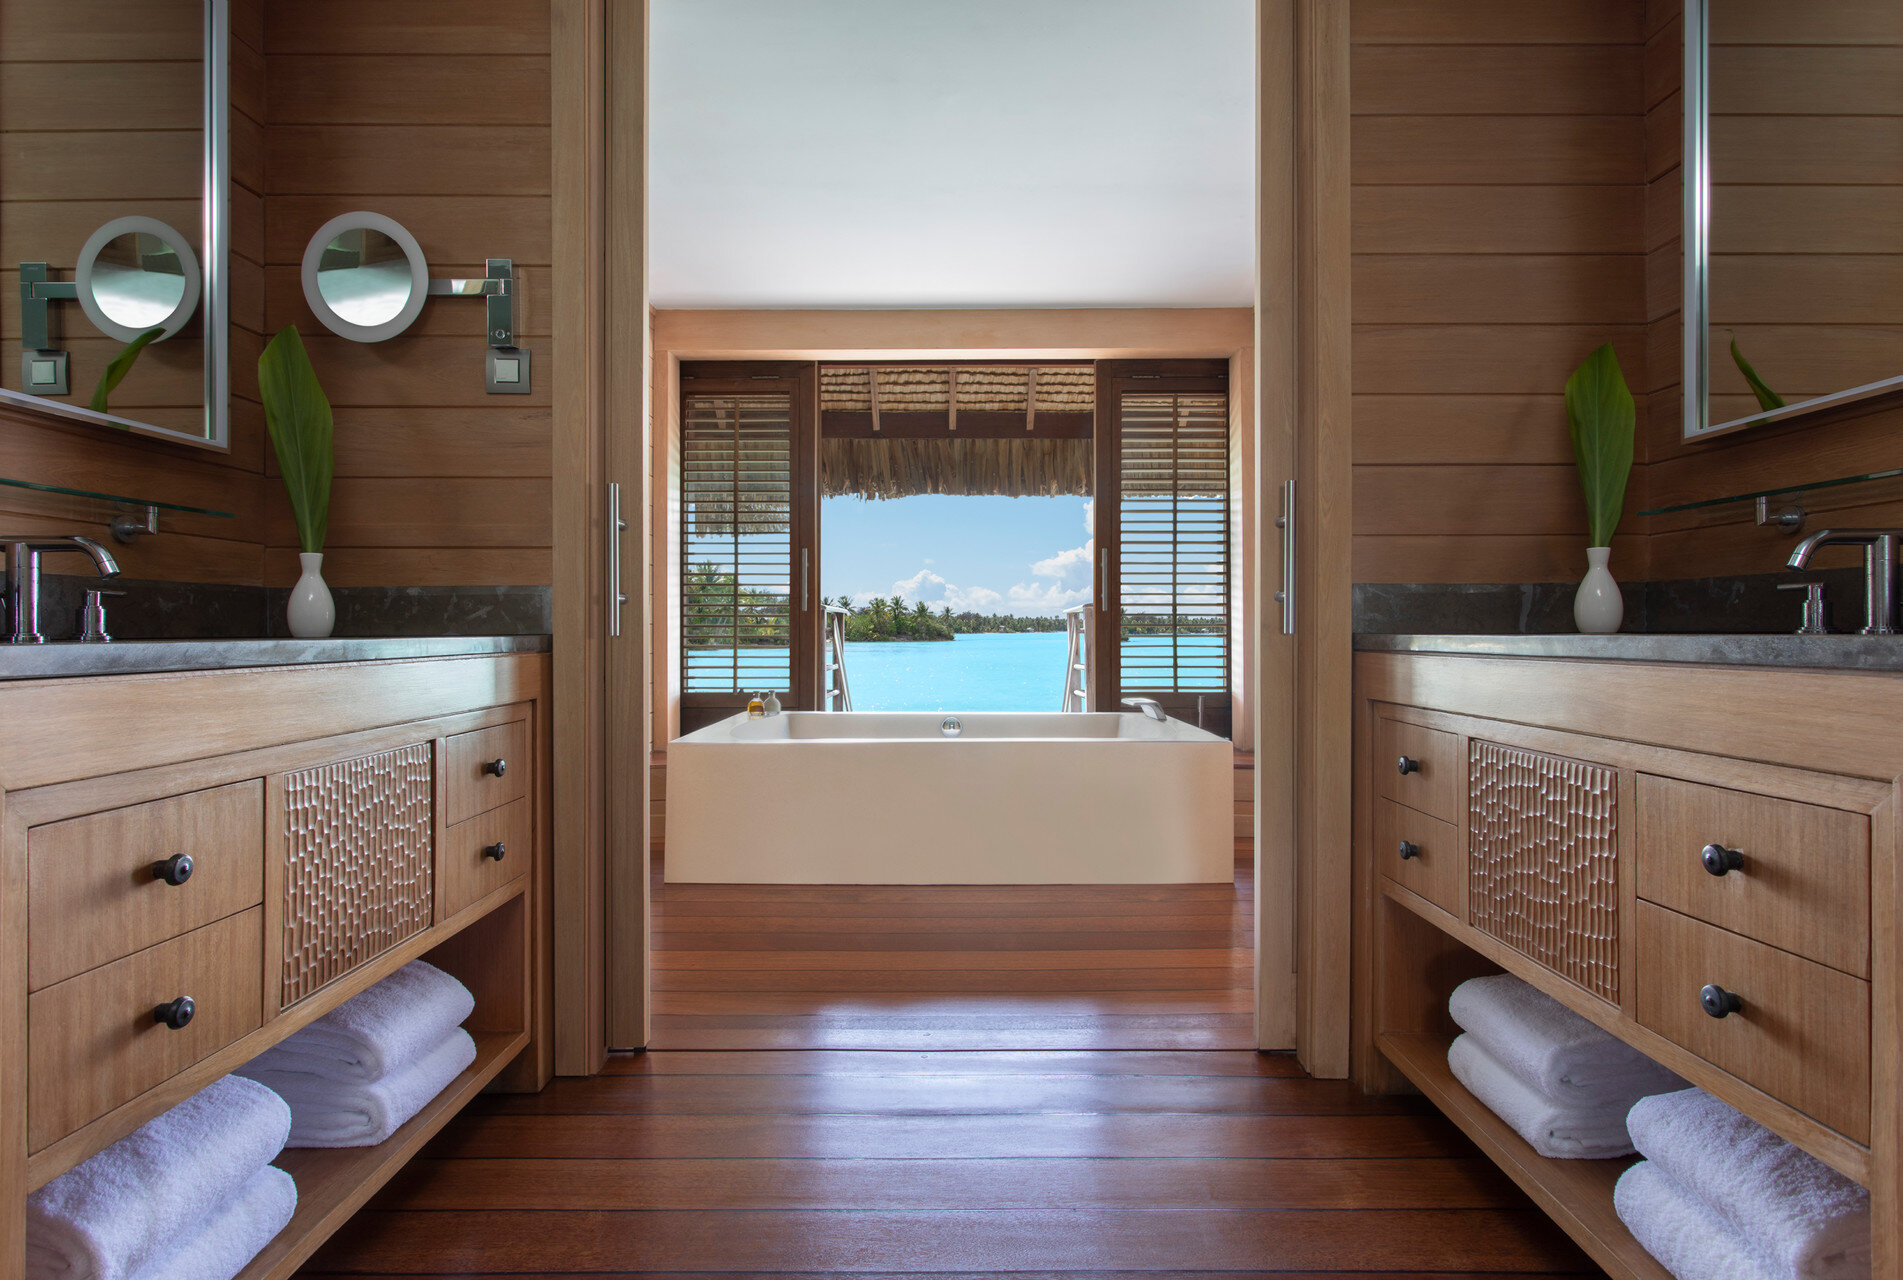   Enjoy a bath with a view (photo credit: Four Seasons Hotels &amp; Resorts)  